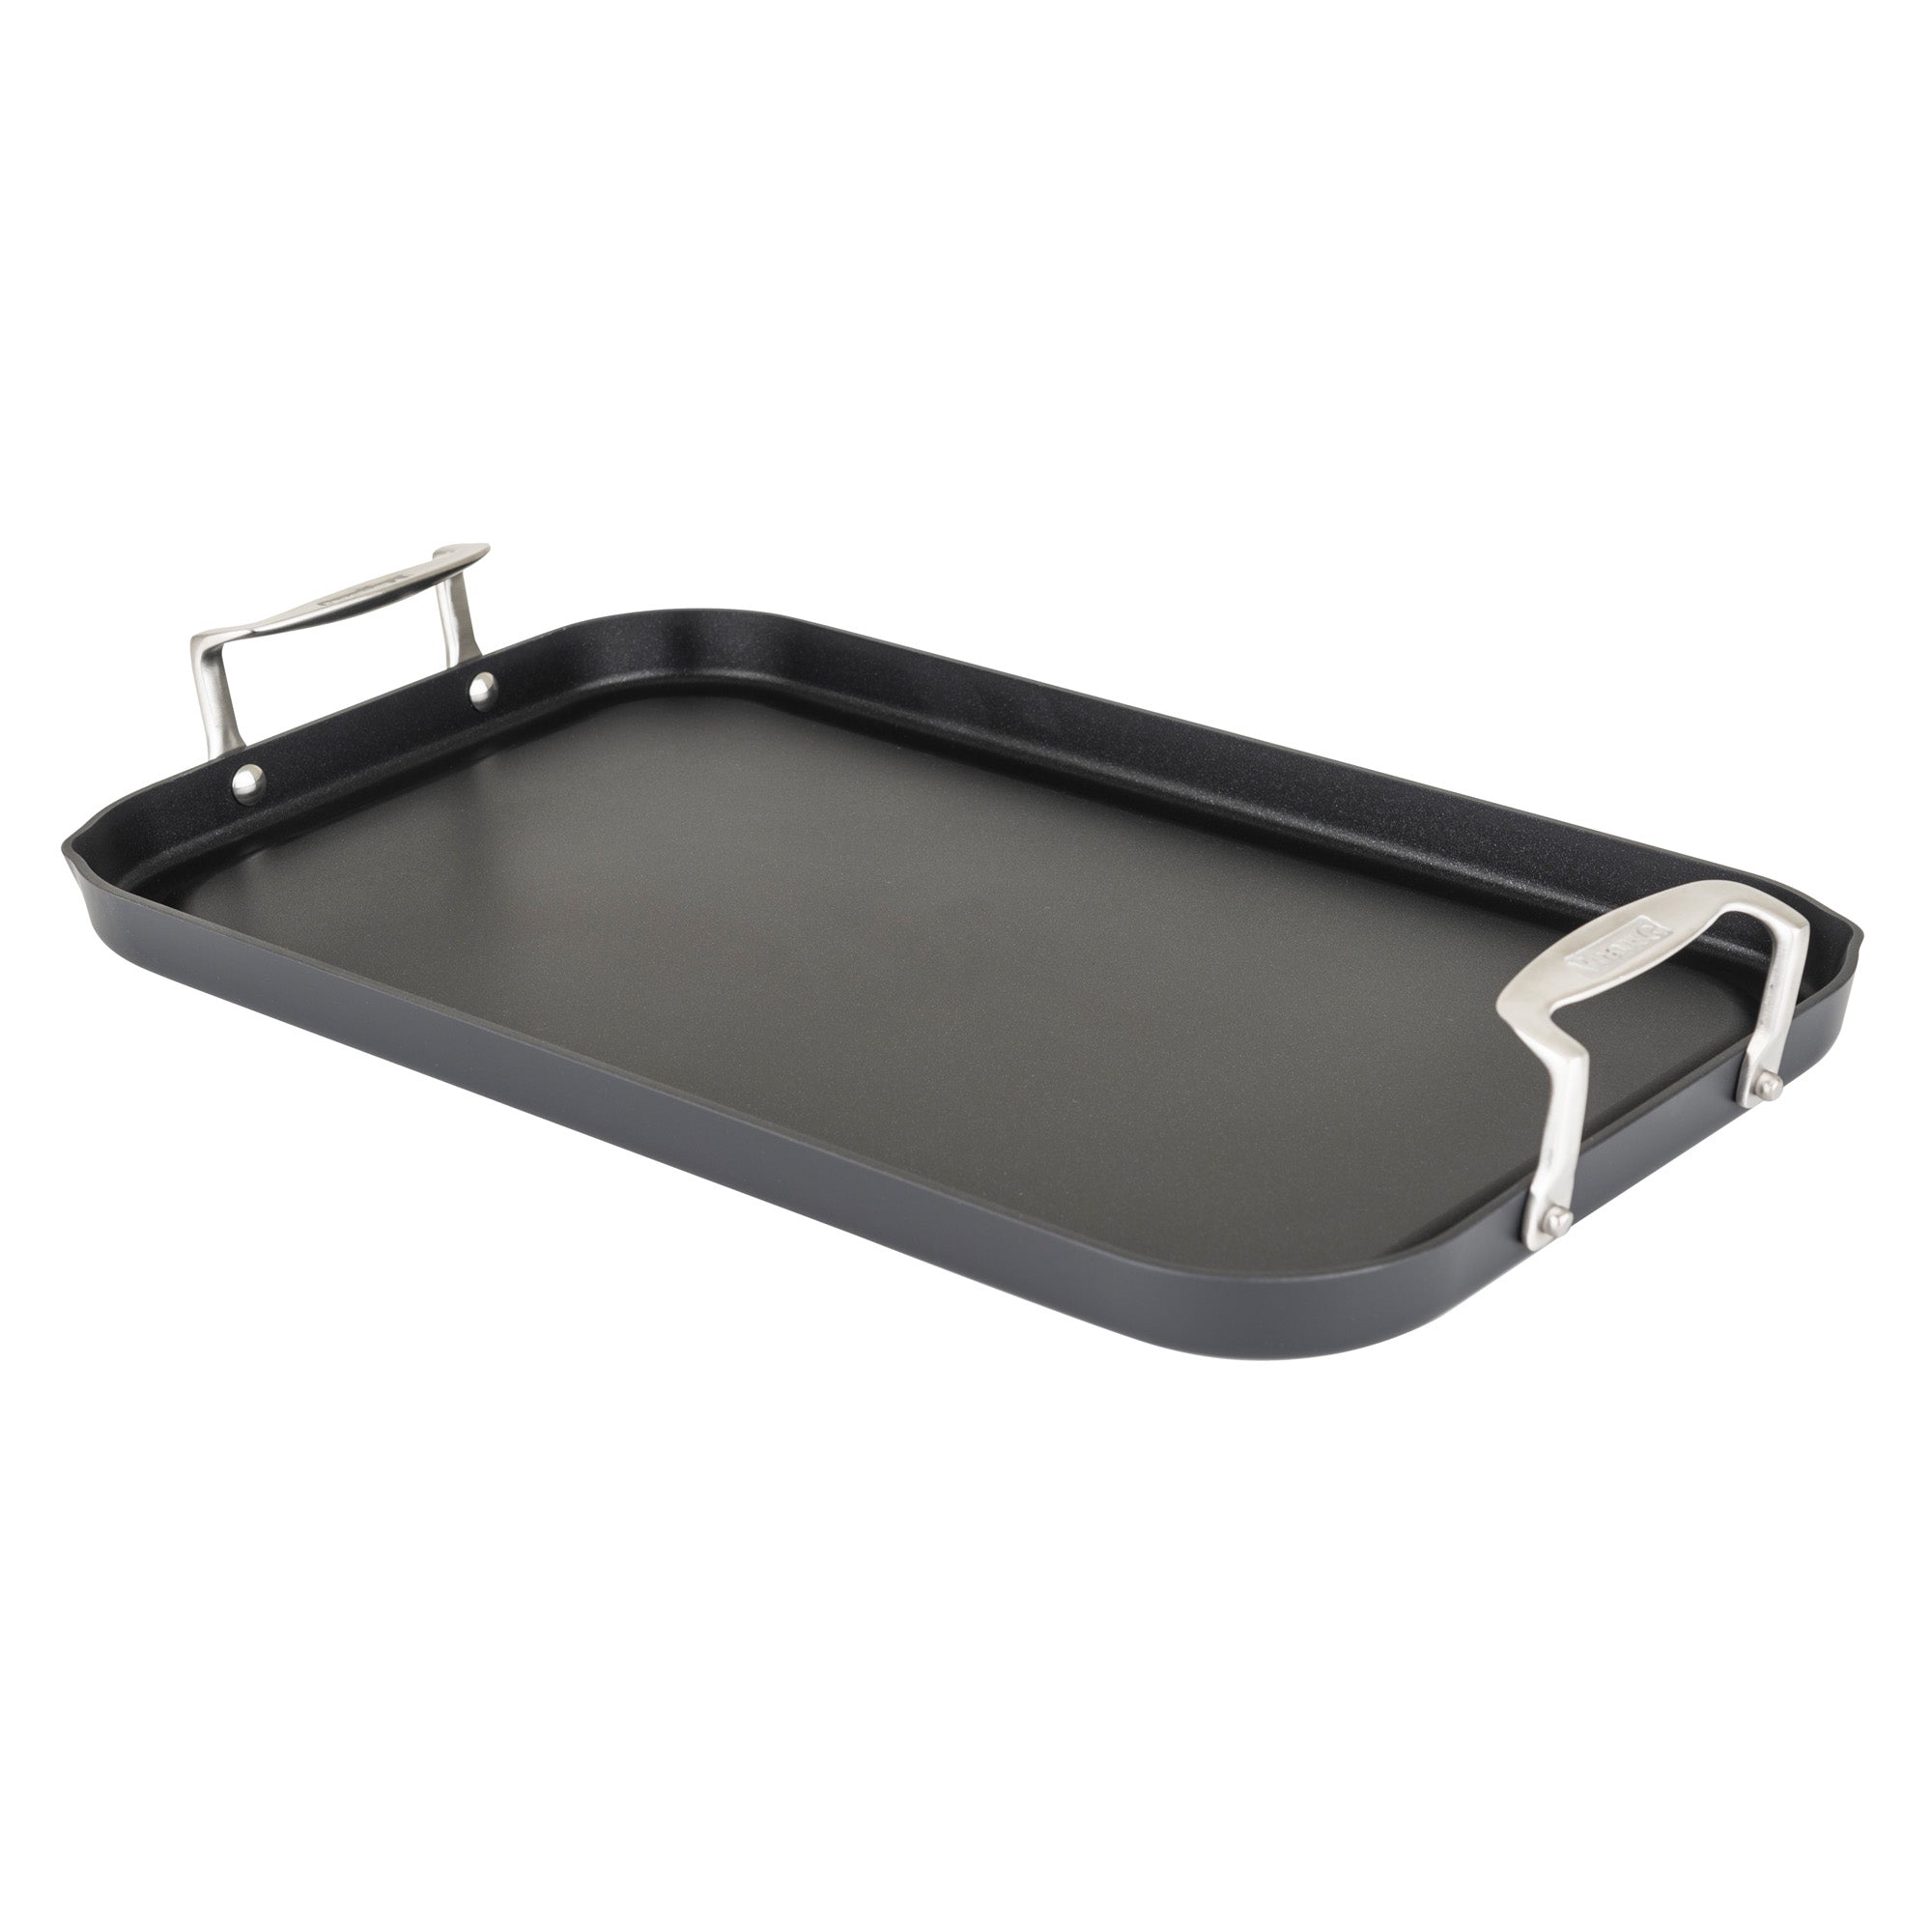 Stovetop Grill Pan, 13x20 inch, Hard Anodized I All-Clad